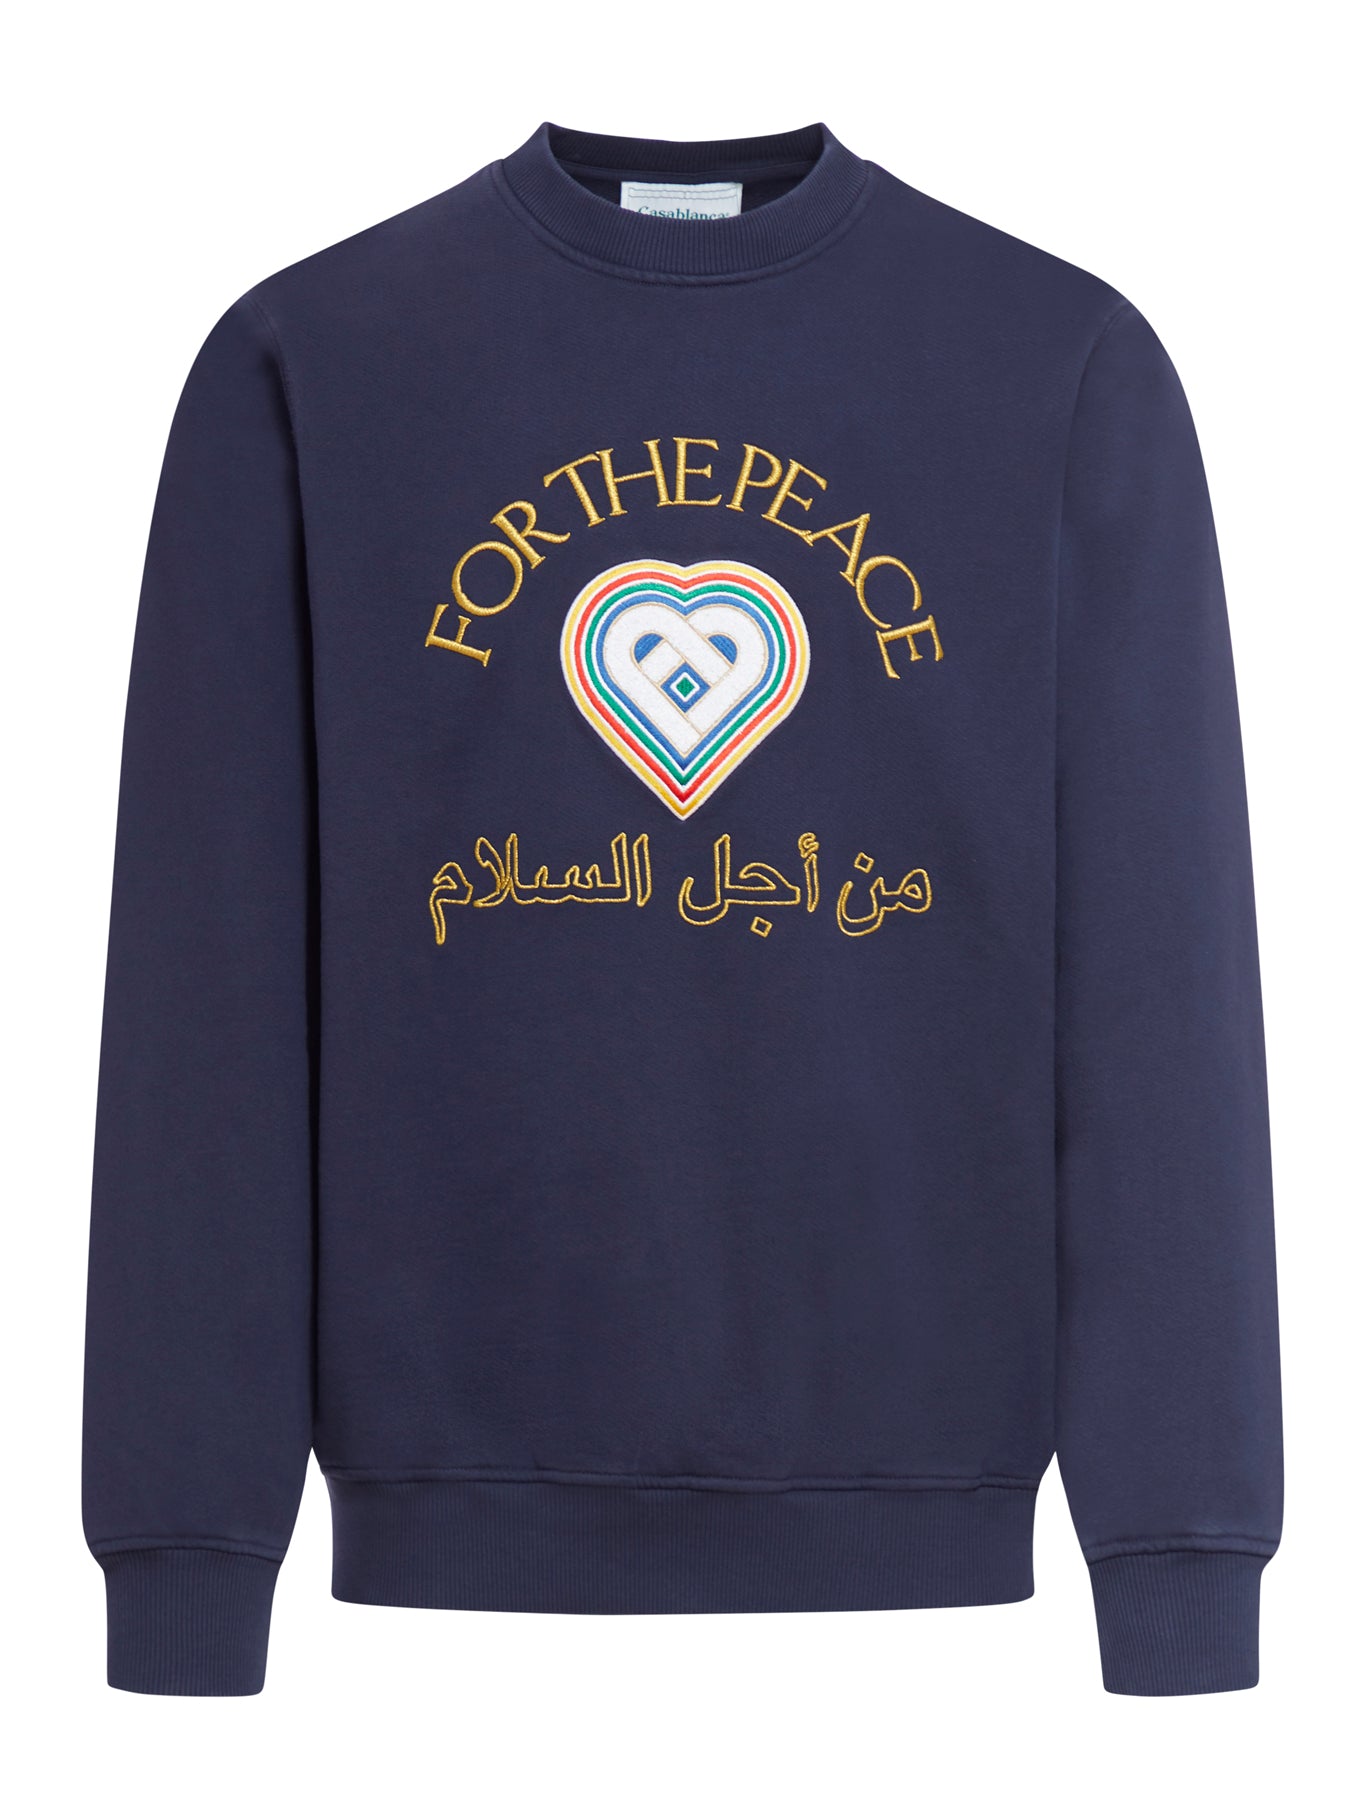 FOR THE PEACE GOLD EMBROIDERED SWEATSHIRT